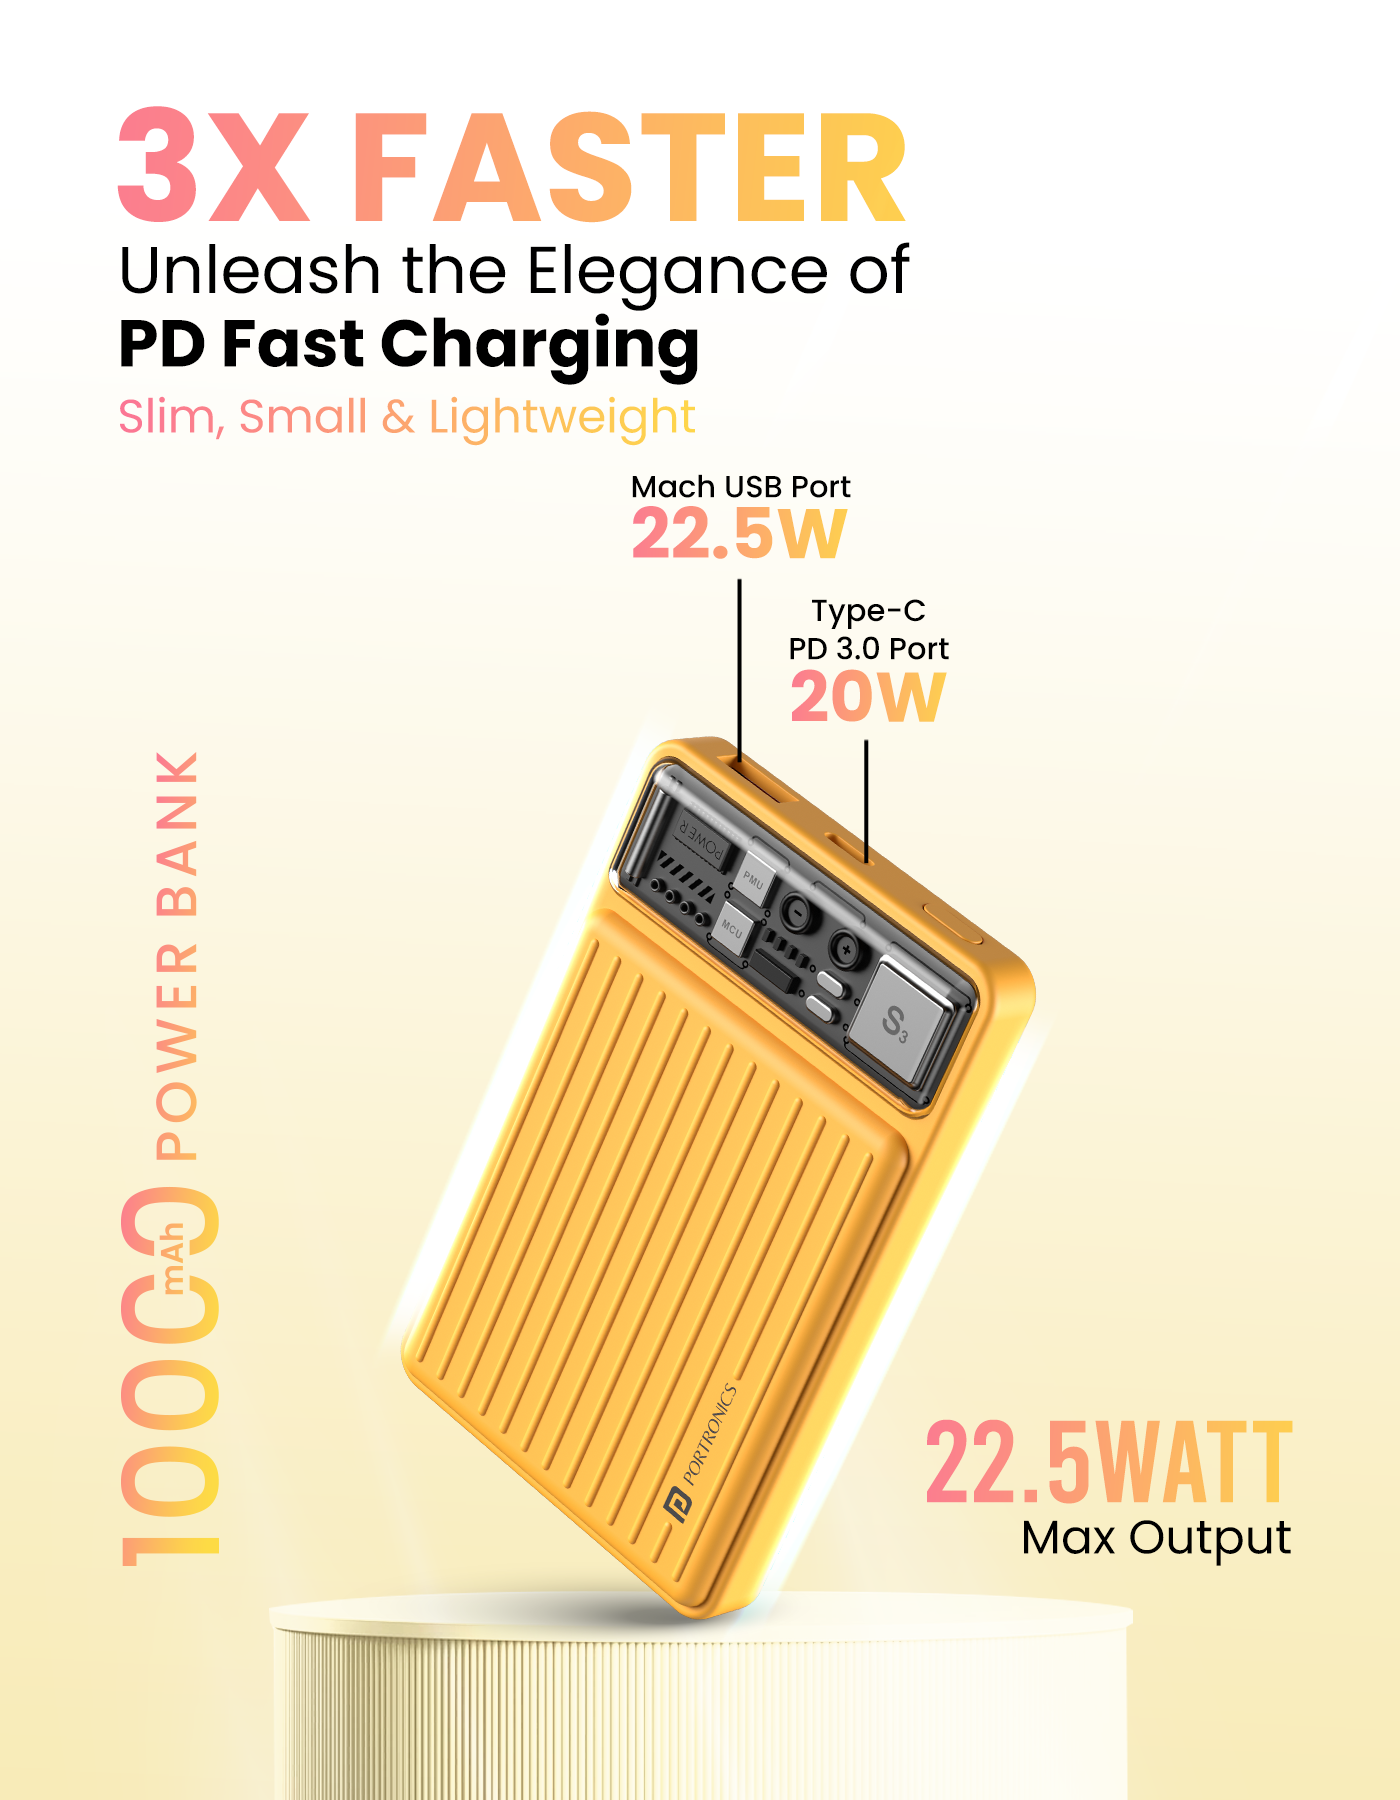 Luxcell mini 10k 10000mah powerbank charge device 3x faster with dual charging